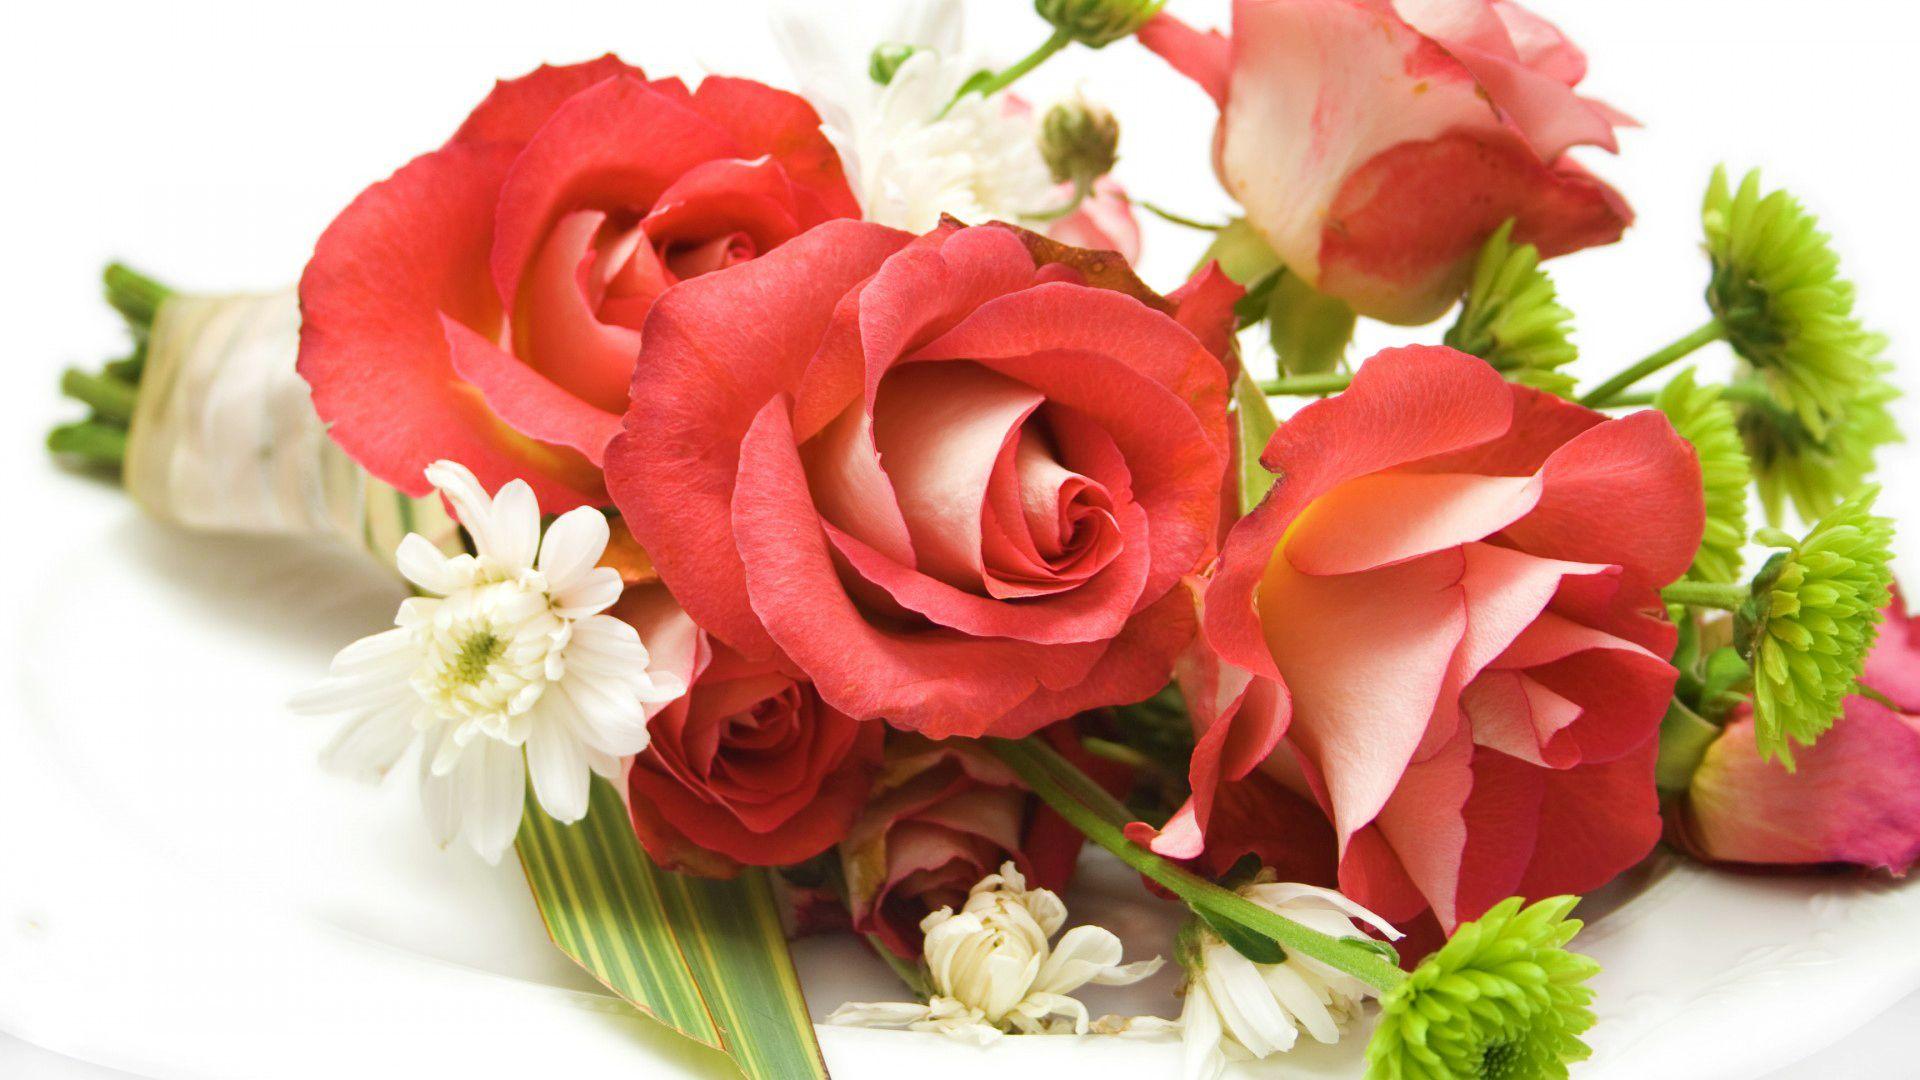 Funeral Flowers Wallpapers - Top Free Funeral Flowers Backgrounds - WallpaperAccess